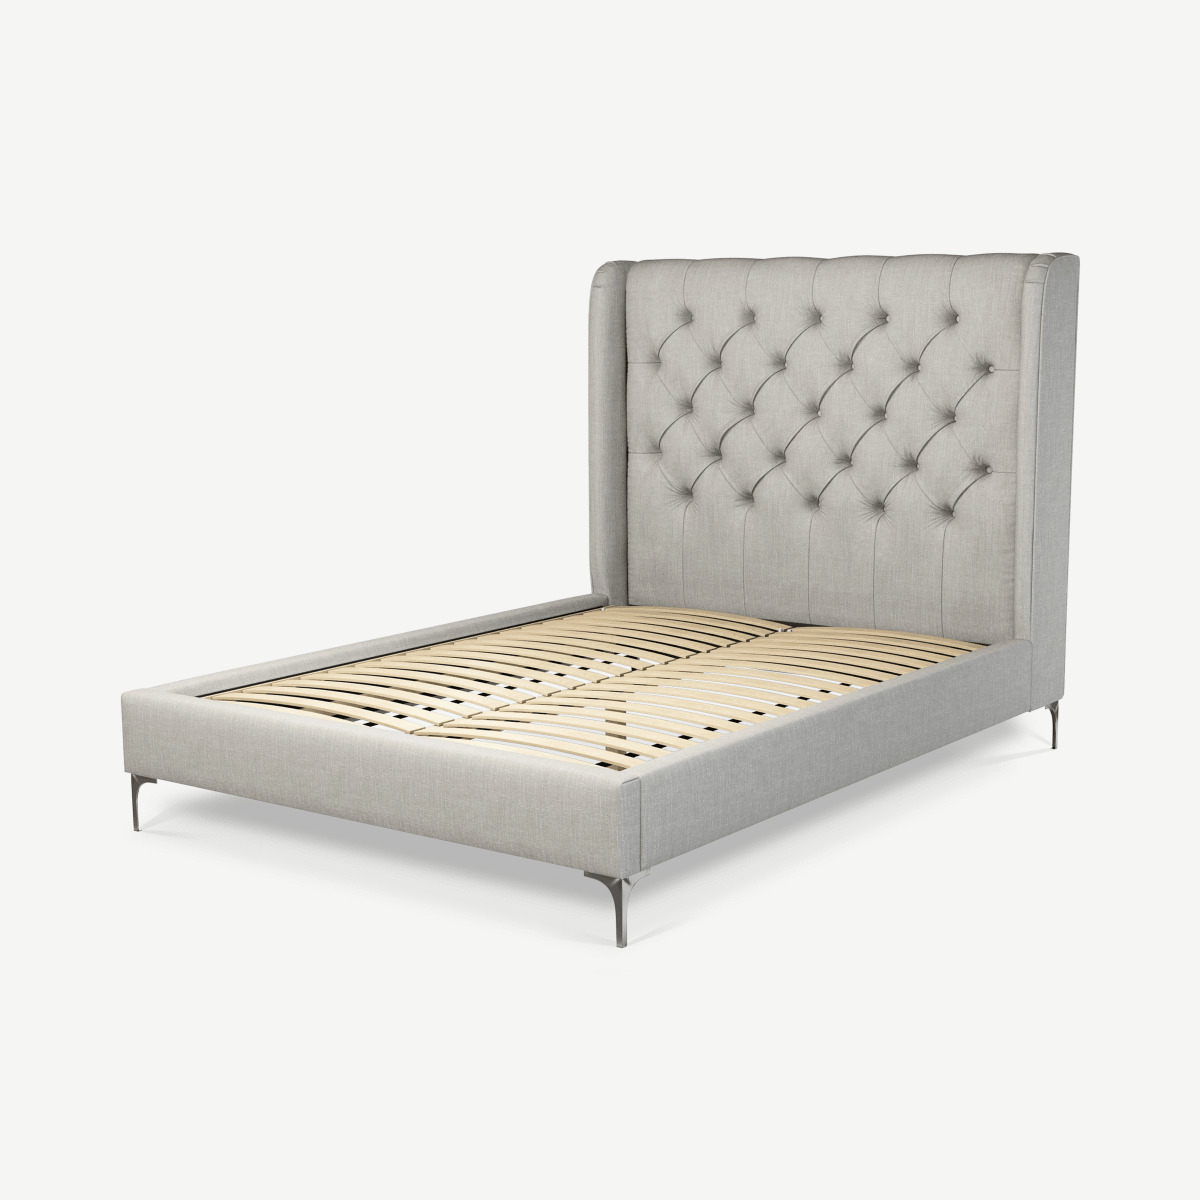 Romare Double Bed, Ghost Grey Cotton with Nickel Legs